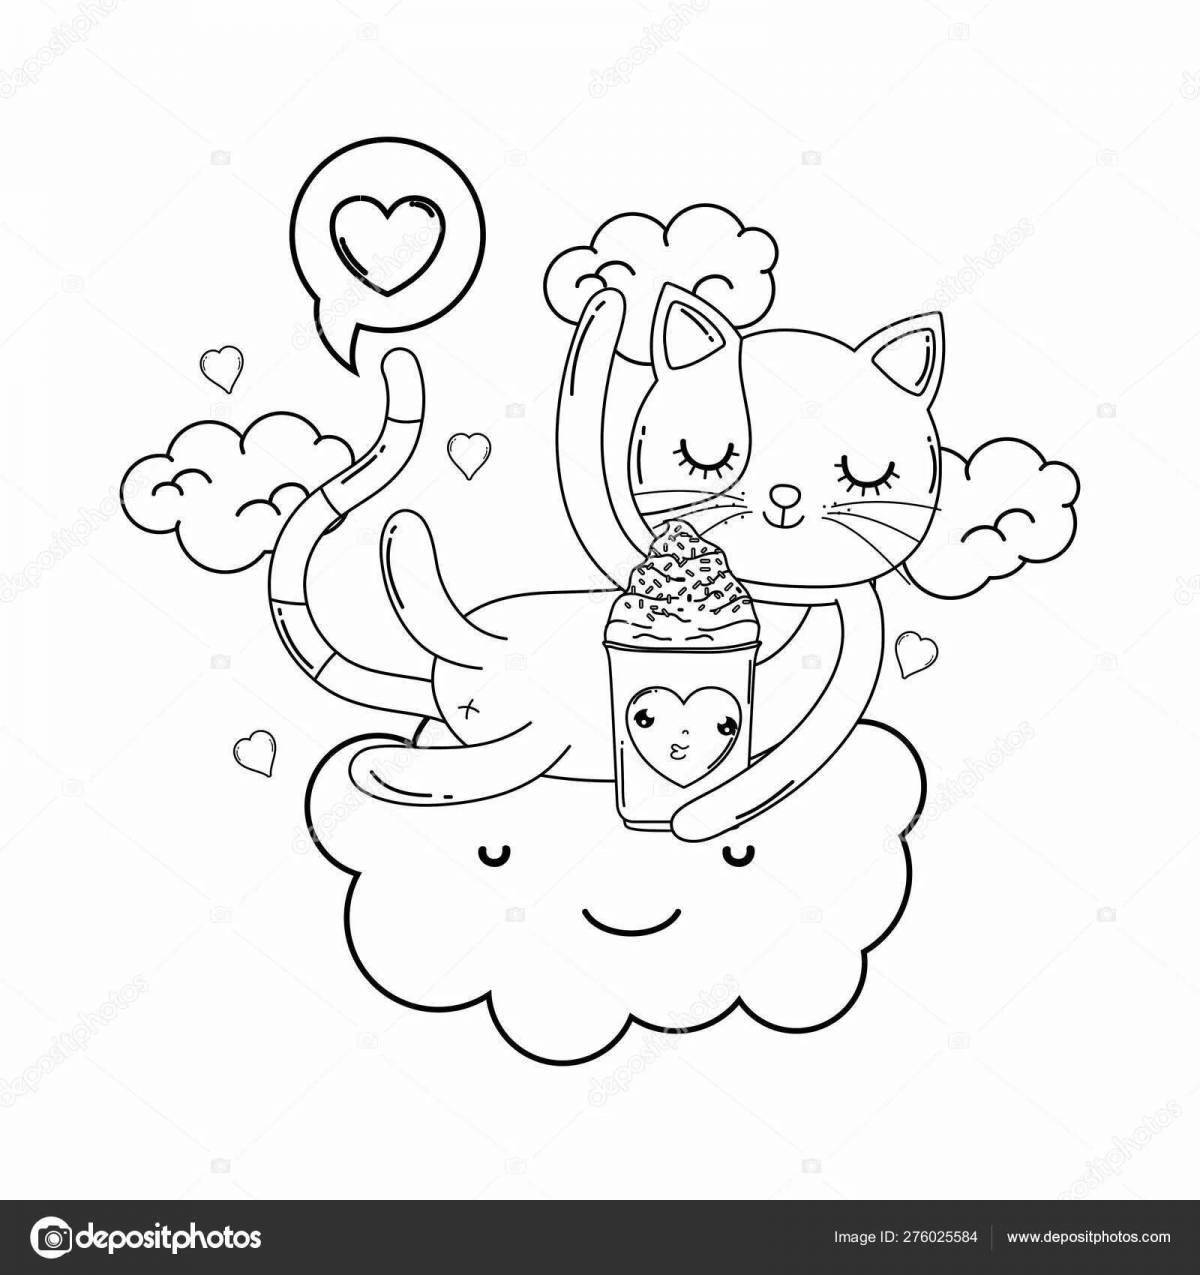 Coloring page funny cat with ice cream